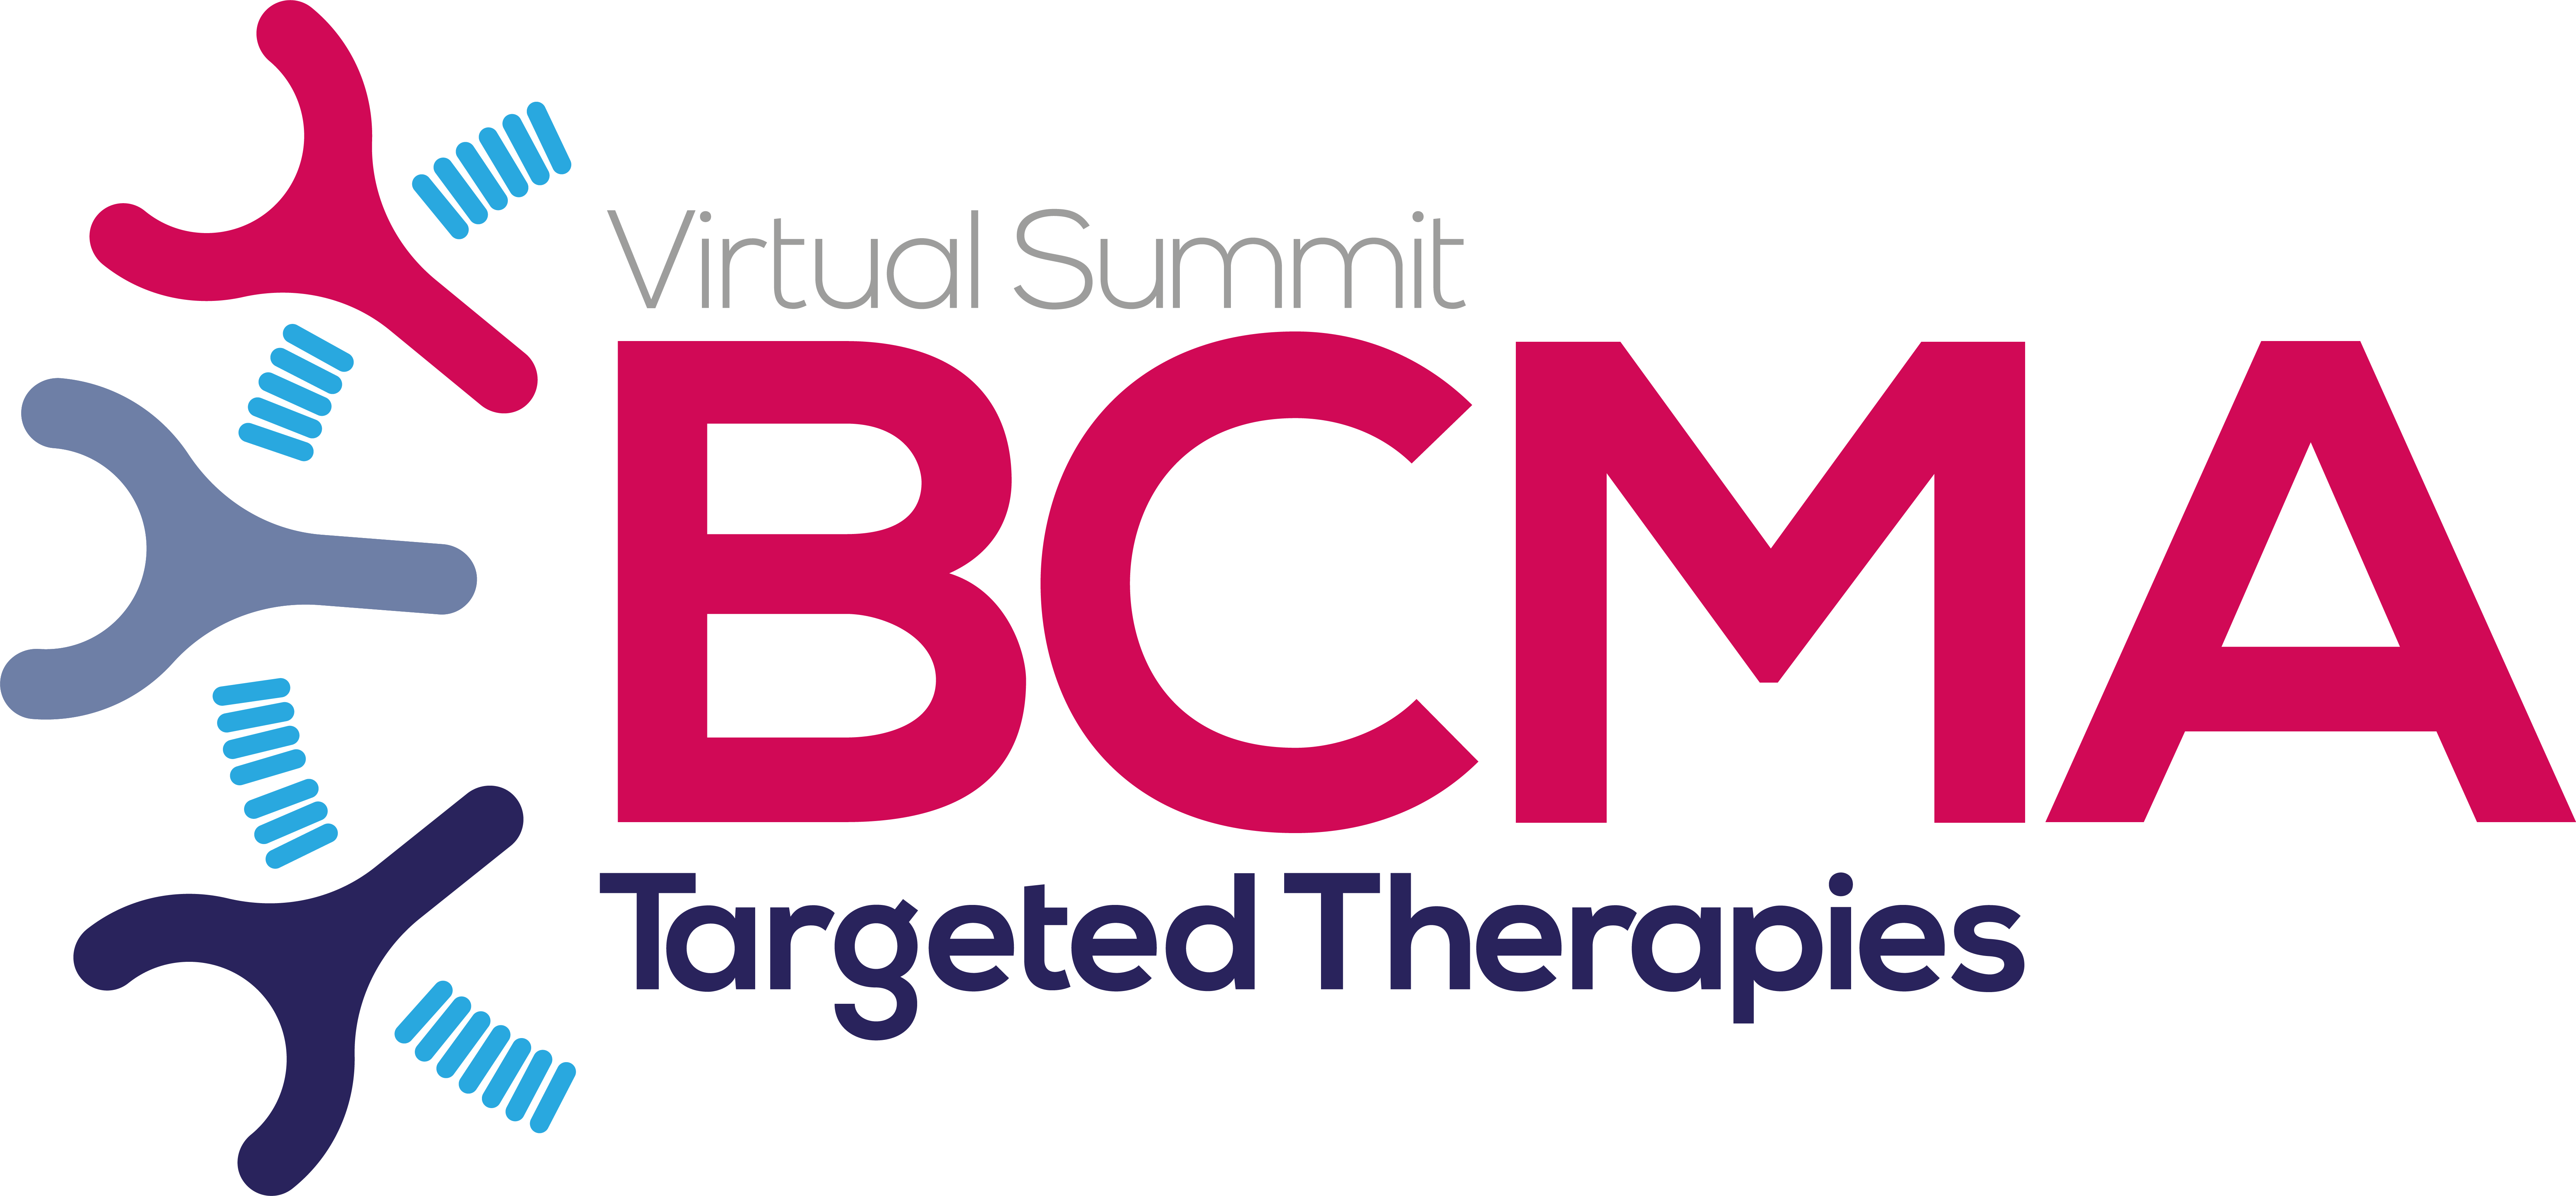 HW201120 BCMA Targeted Therapies logo FINAL